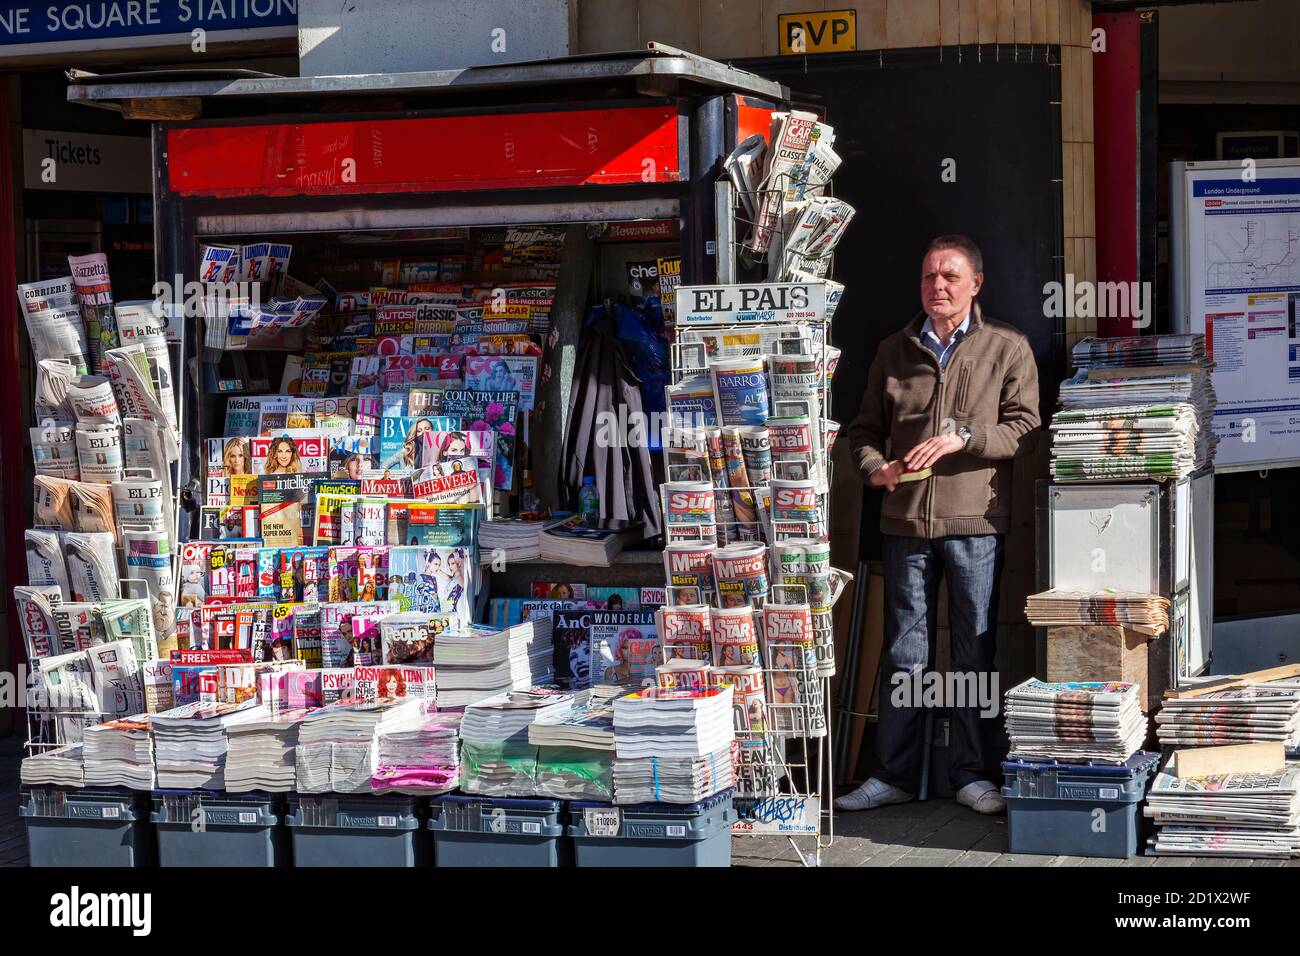 London, UK, February 26, 2012 : Vendor selling English and foreign newspapers and magazines at a newsagent stand outside Sloane Square tube station to Stock Photo